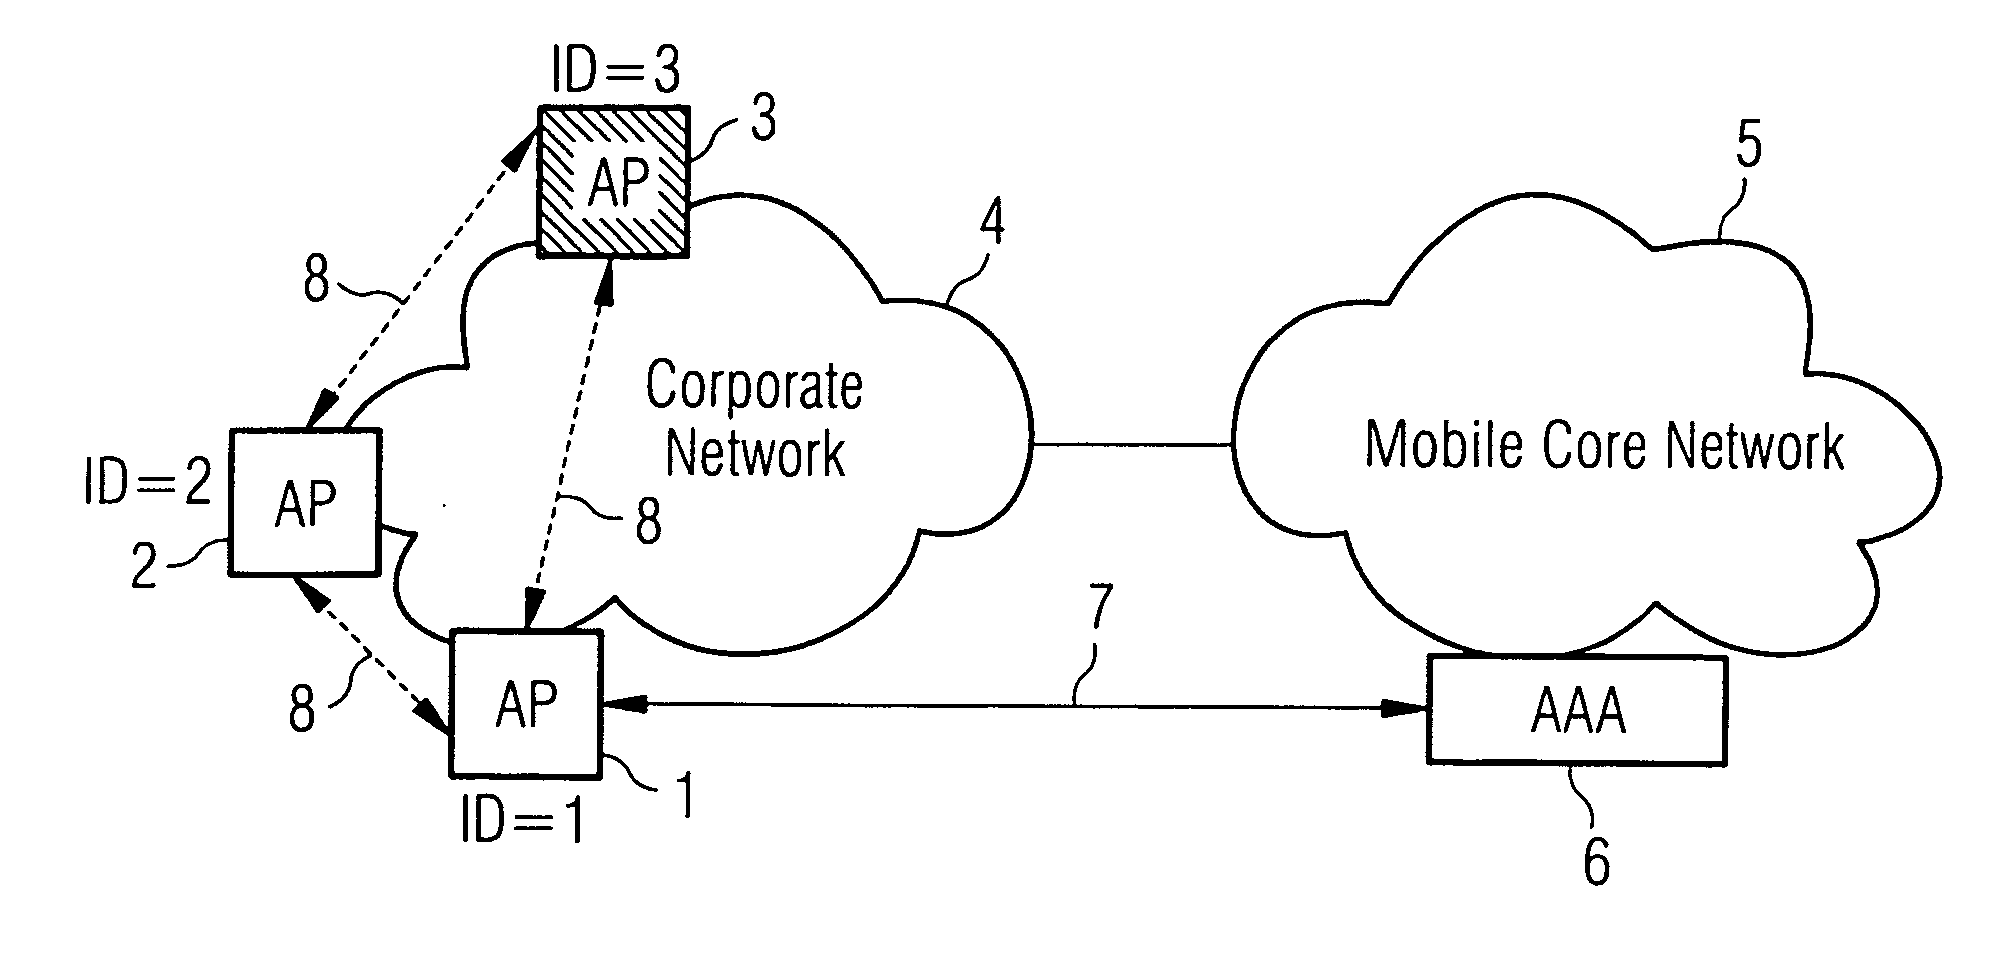 Method of authenticating access points on a wireless network